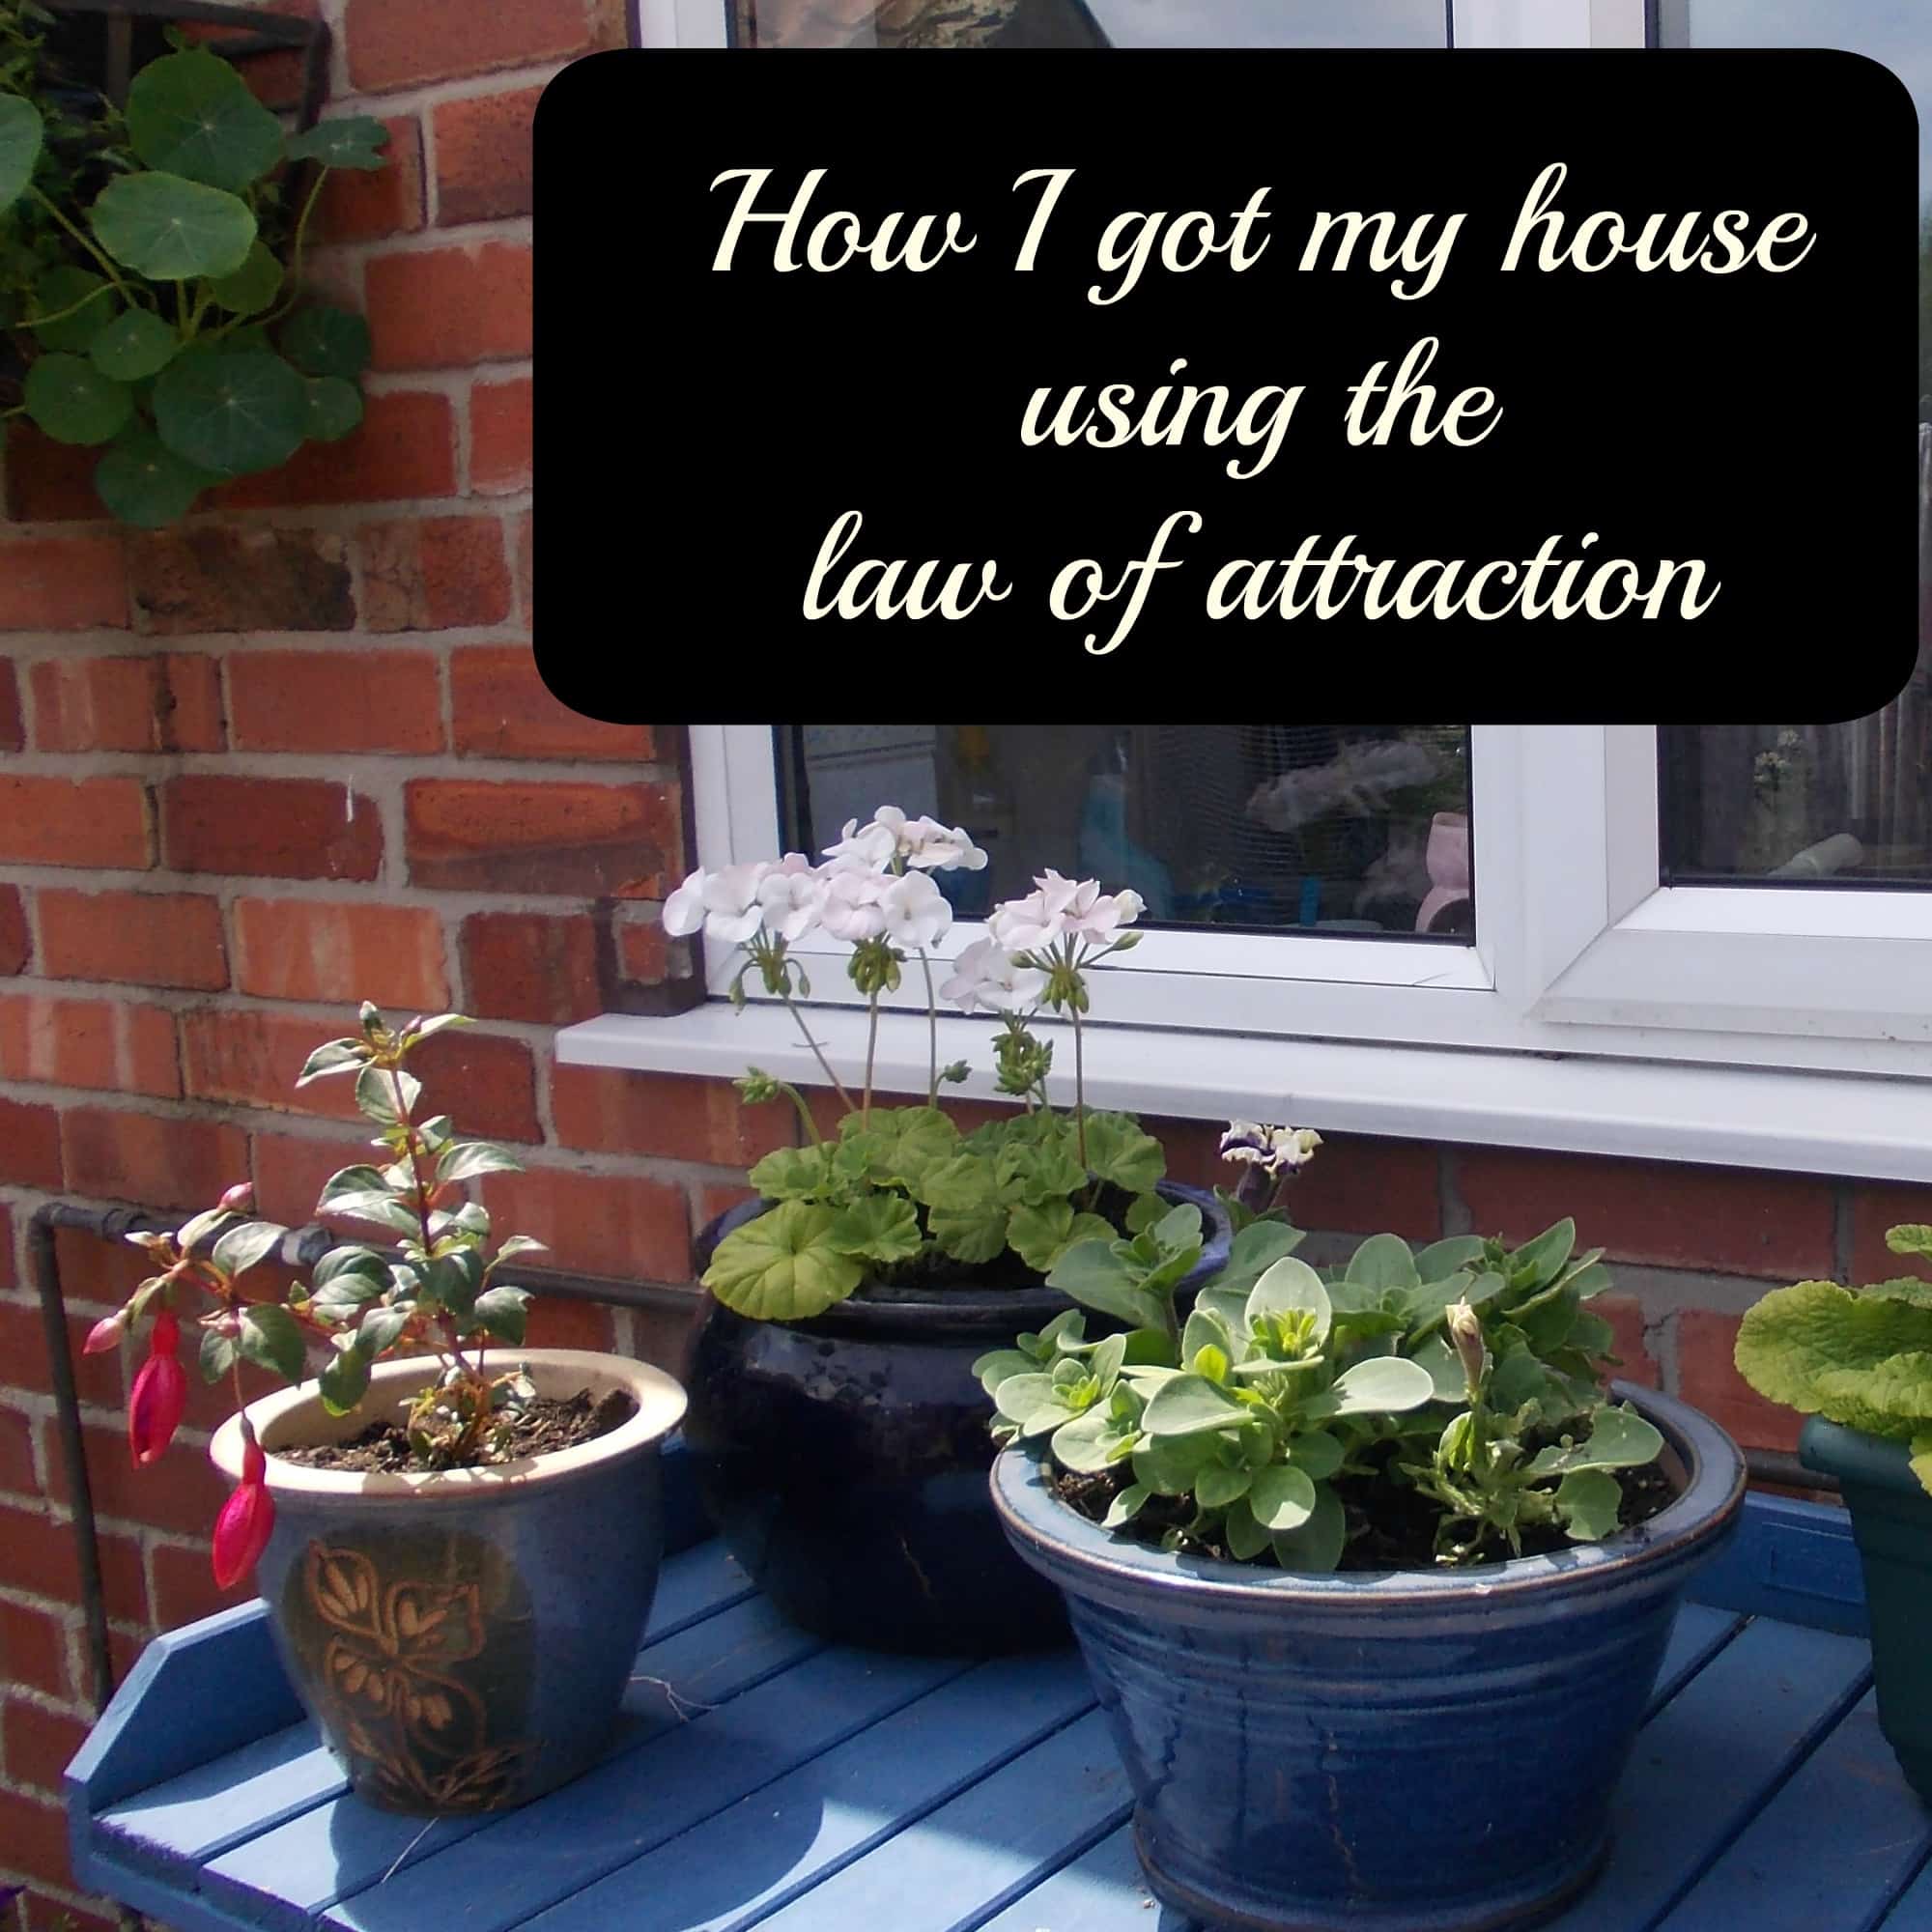 Ho I got my house using the law of attraction